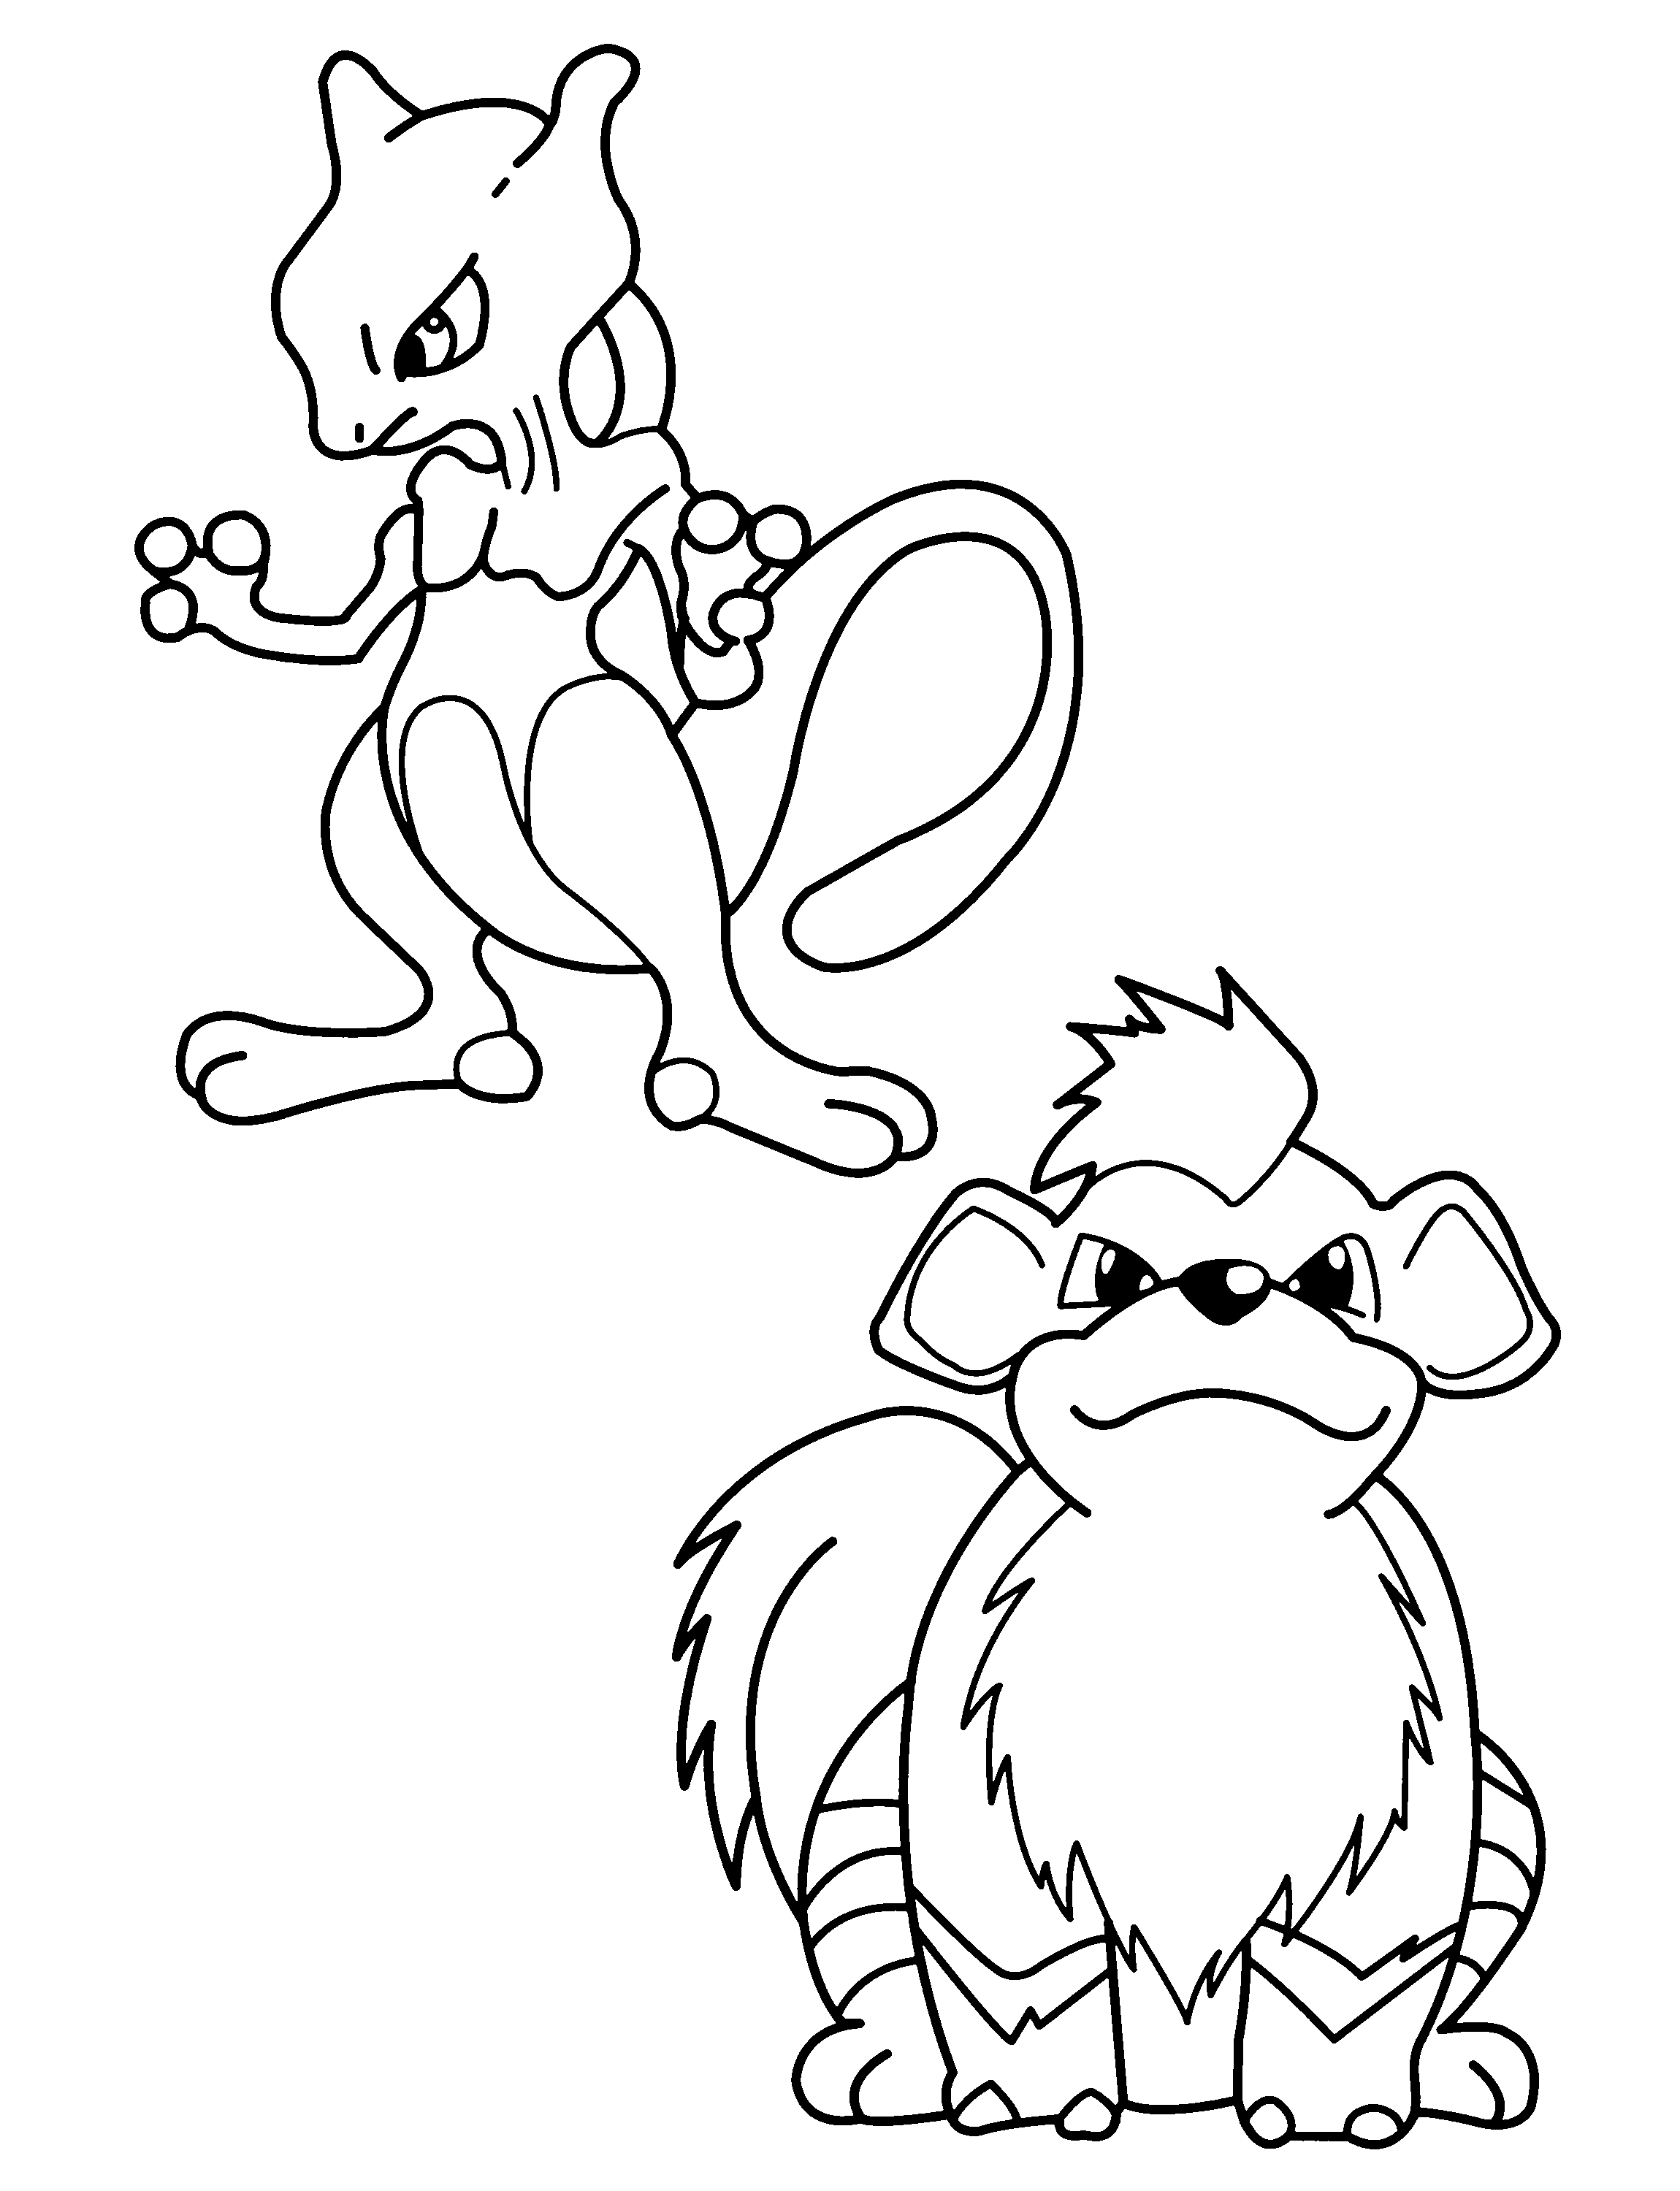 animated-coloring-pages-pokemon-image-0308